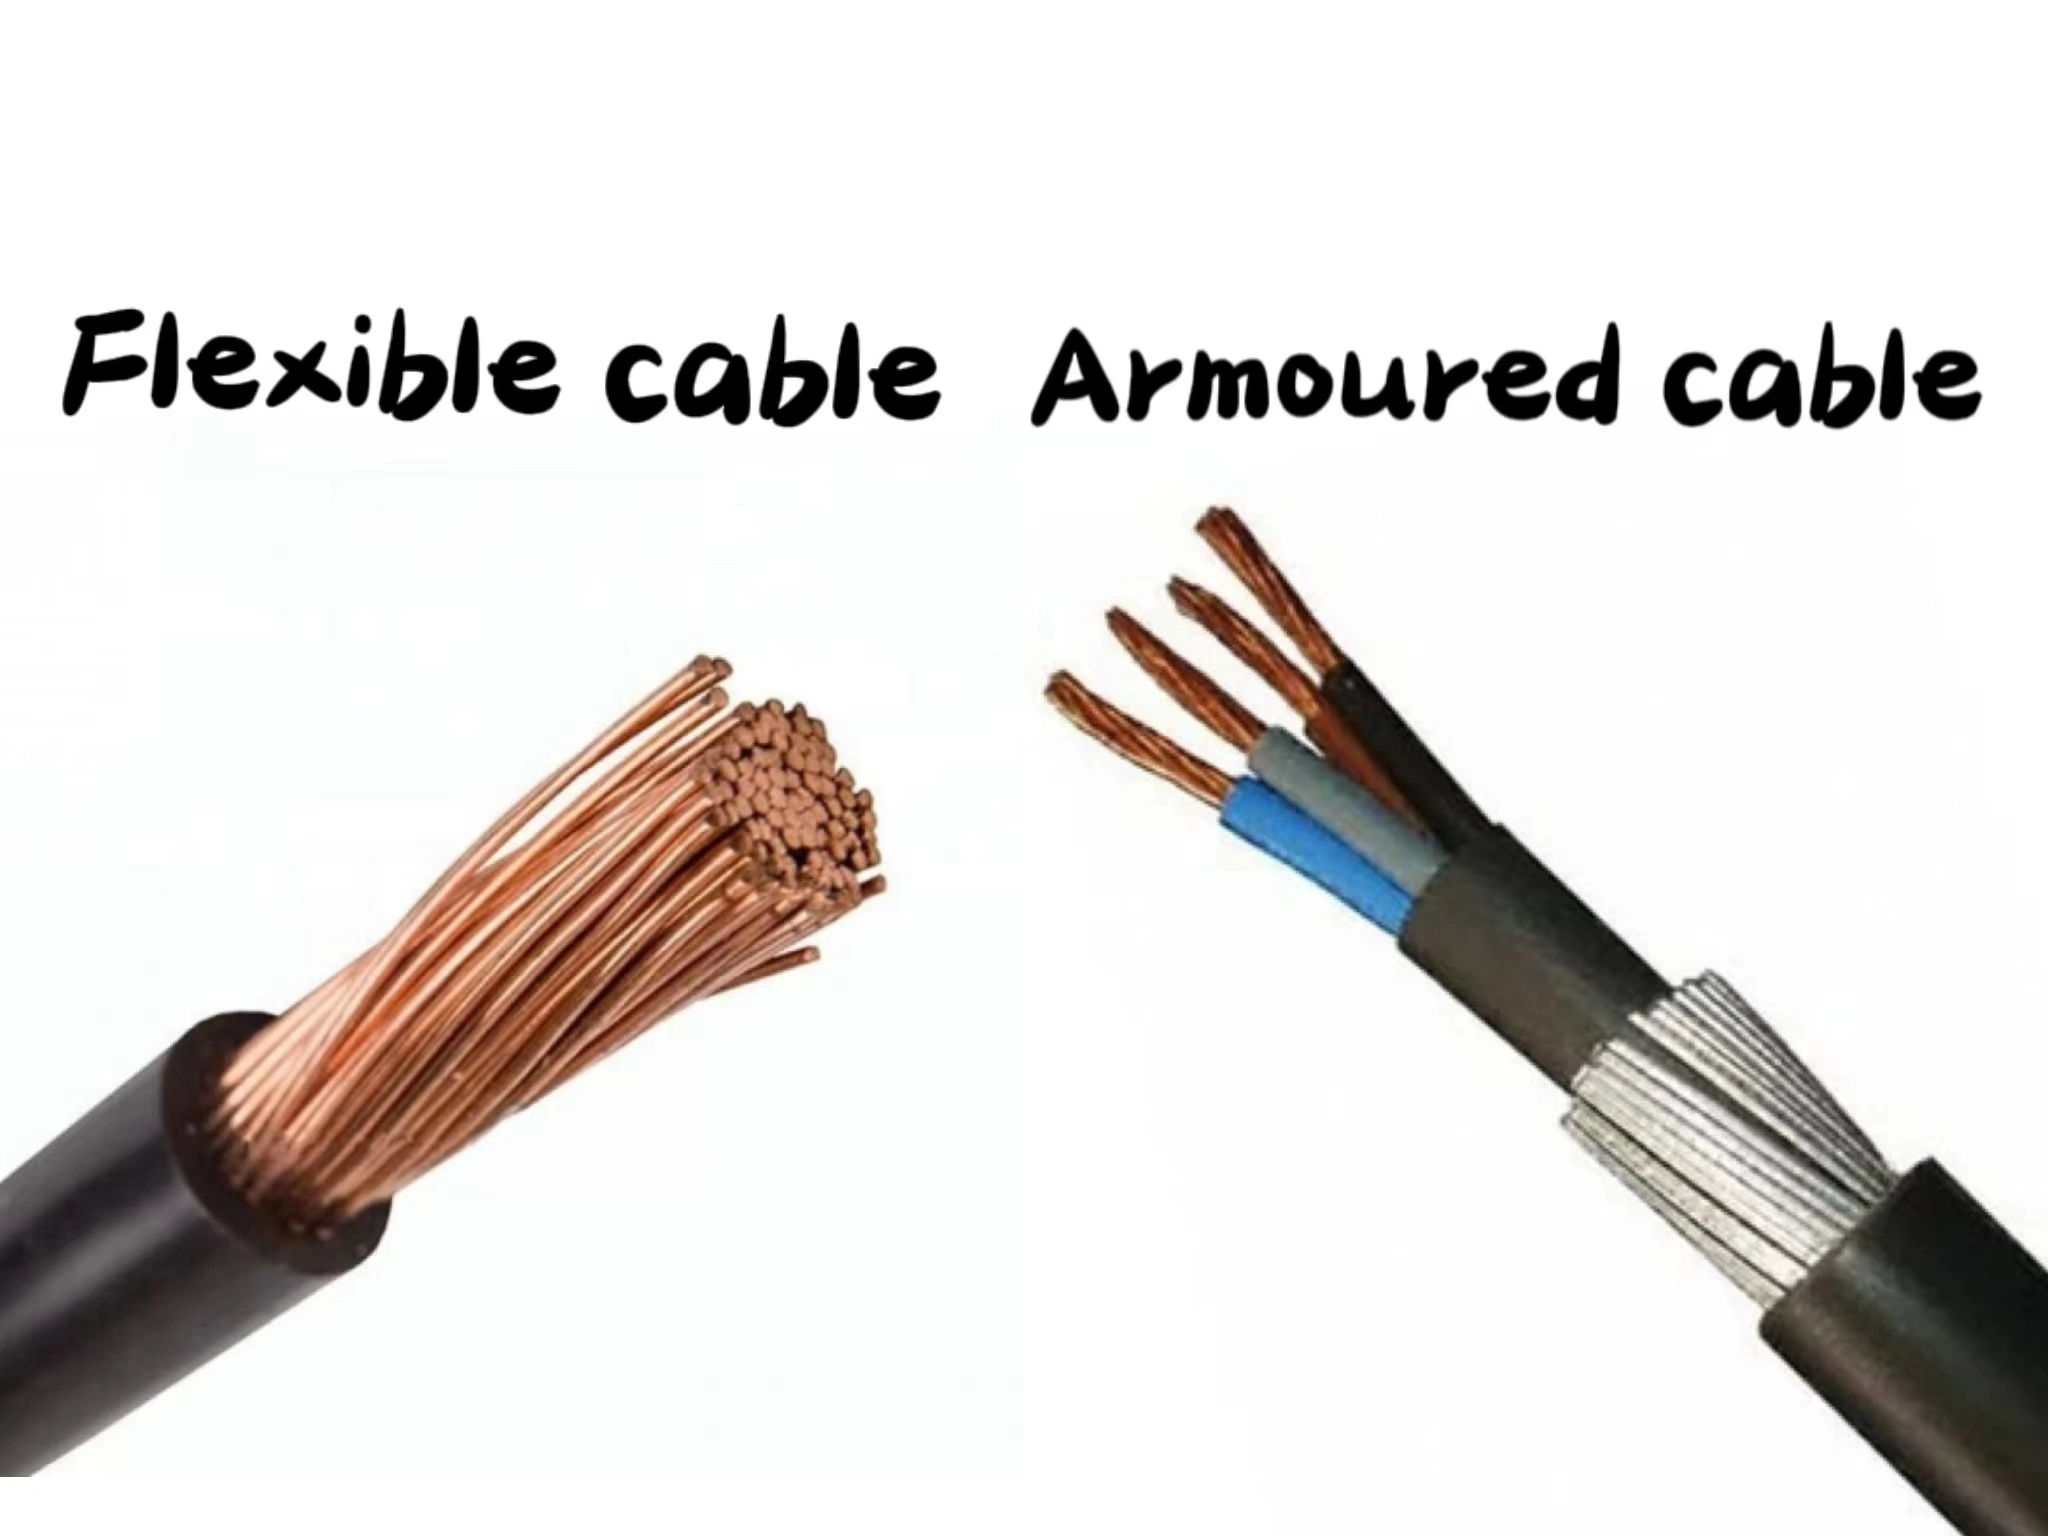 armoured cable and flexible cable